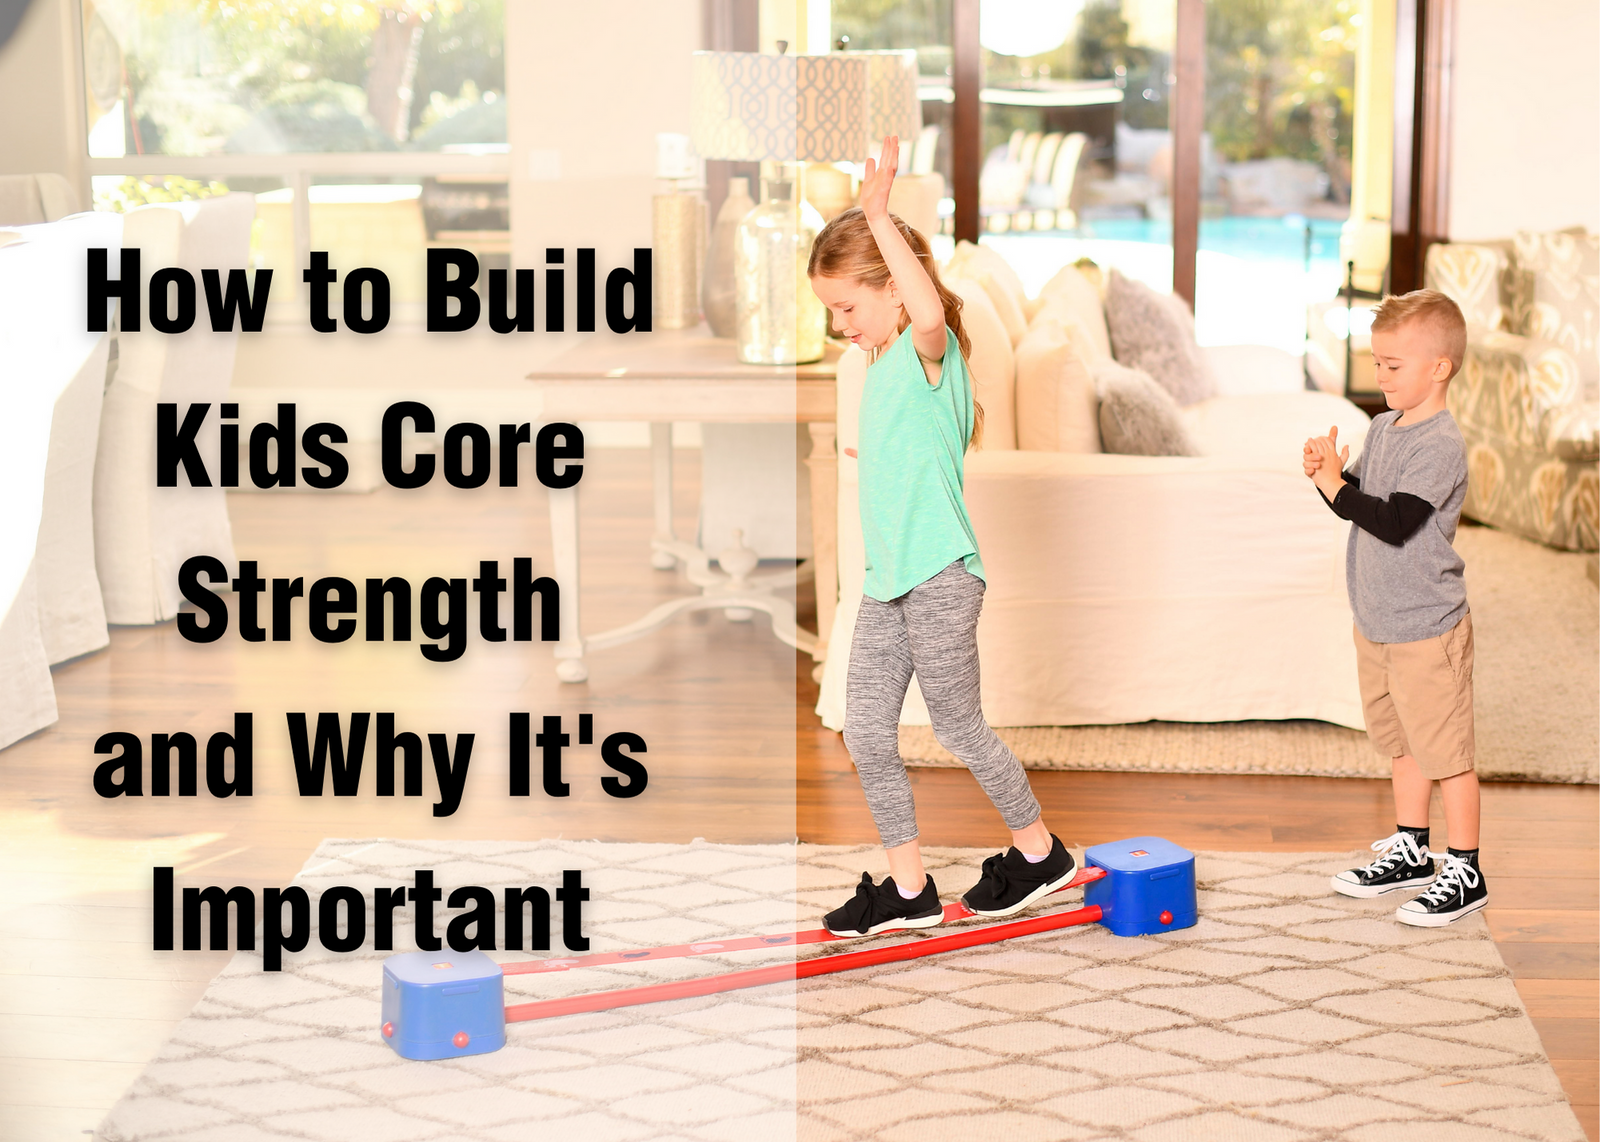 How to Build Kids Core Strength and Why It's Important